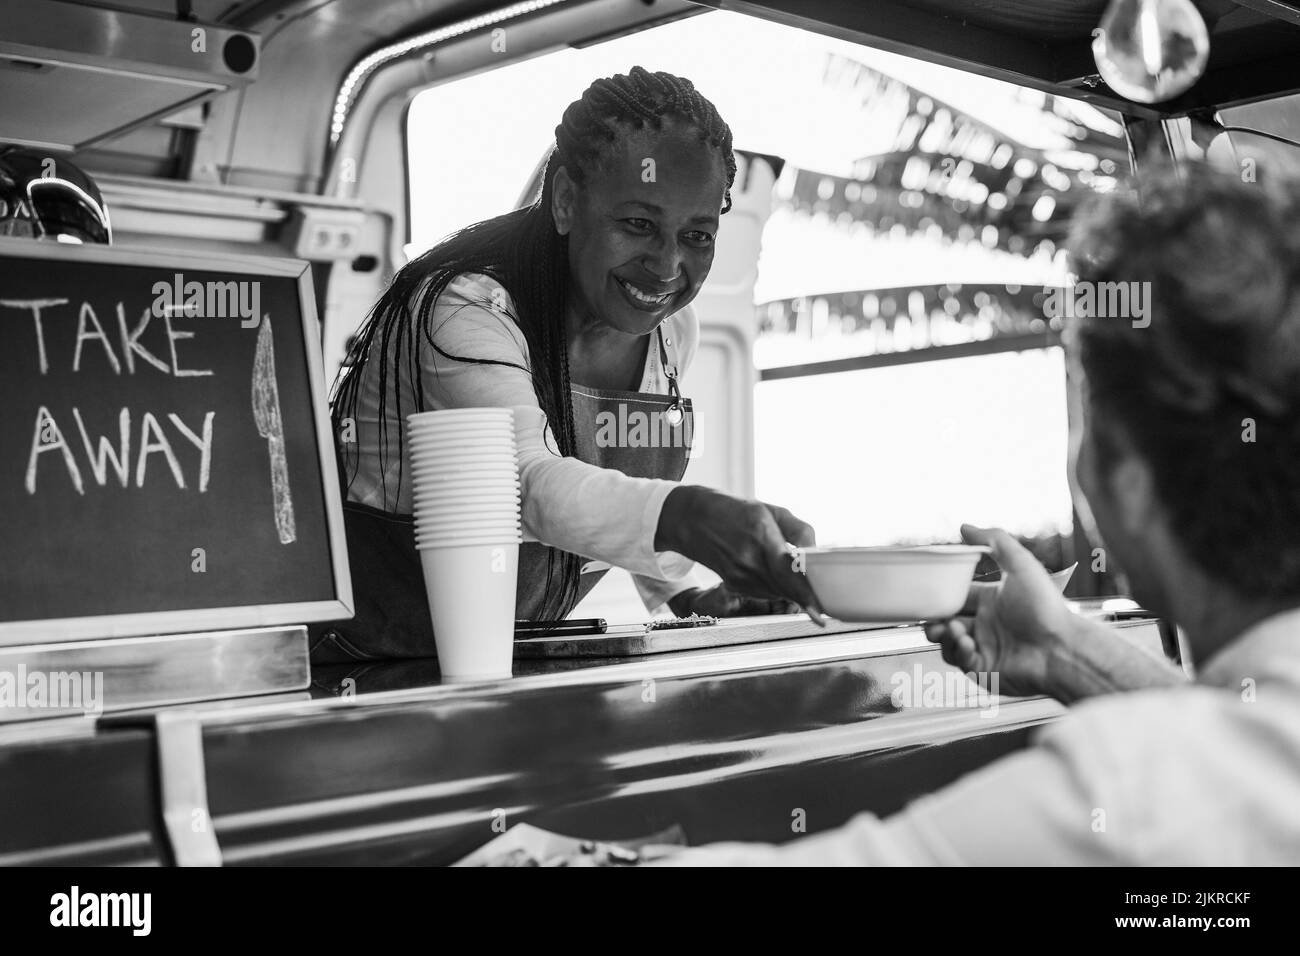 African senior woman serving takeaway food inside food truck - Focus on chef female face - Black and white editing Stock Photo